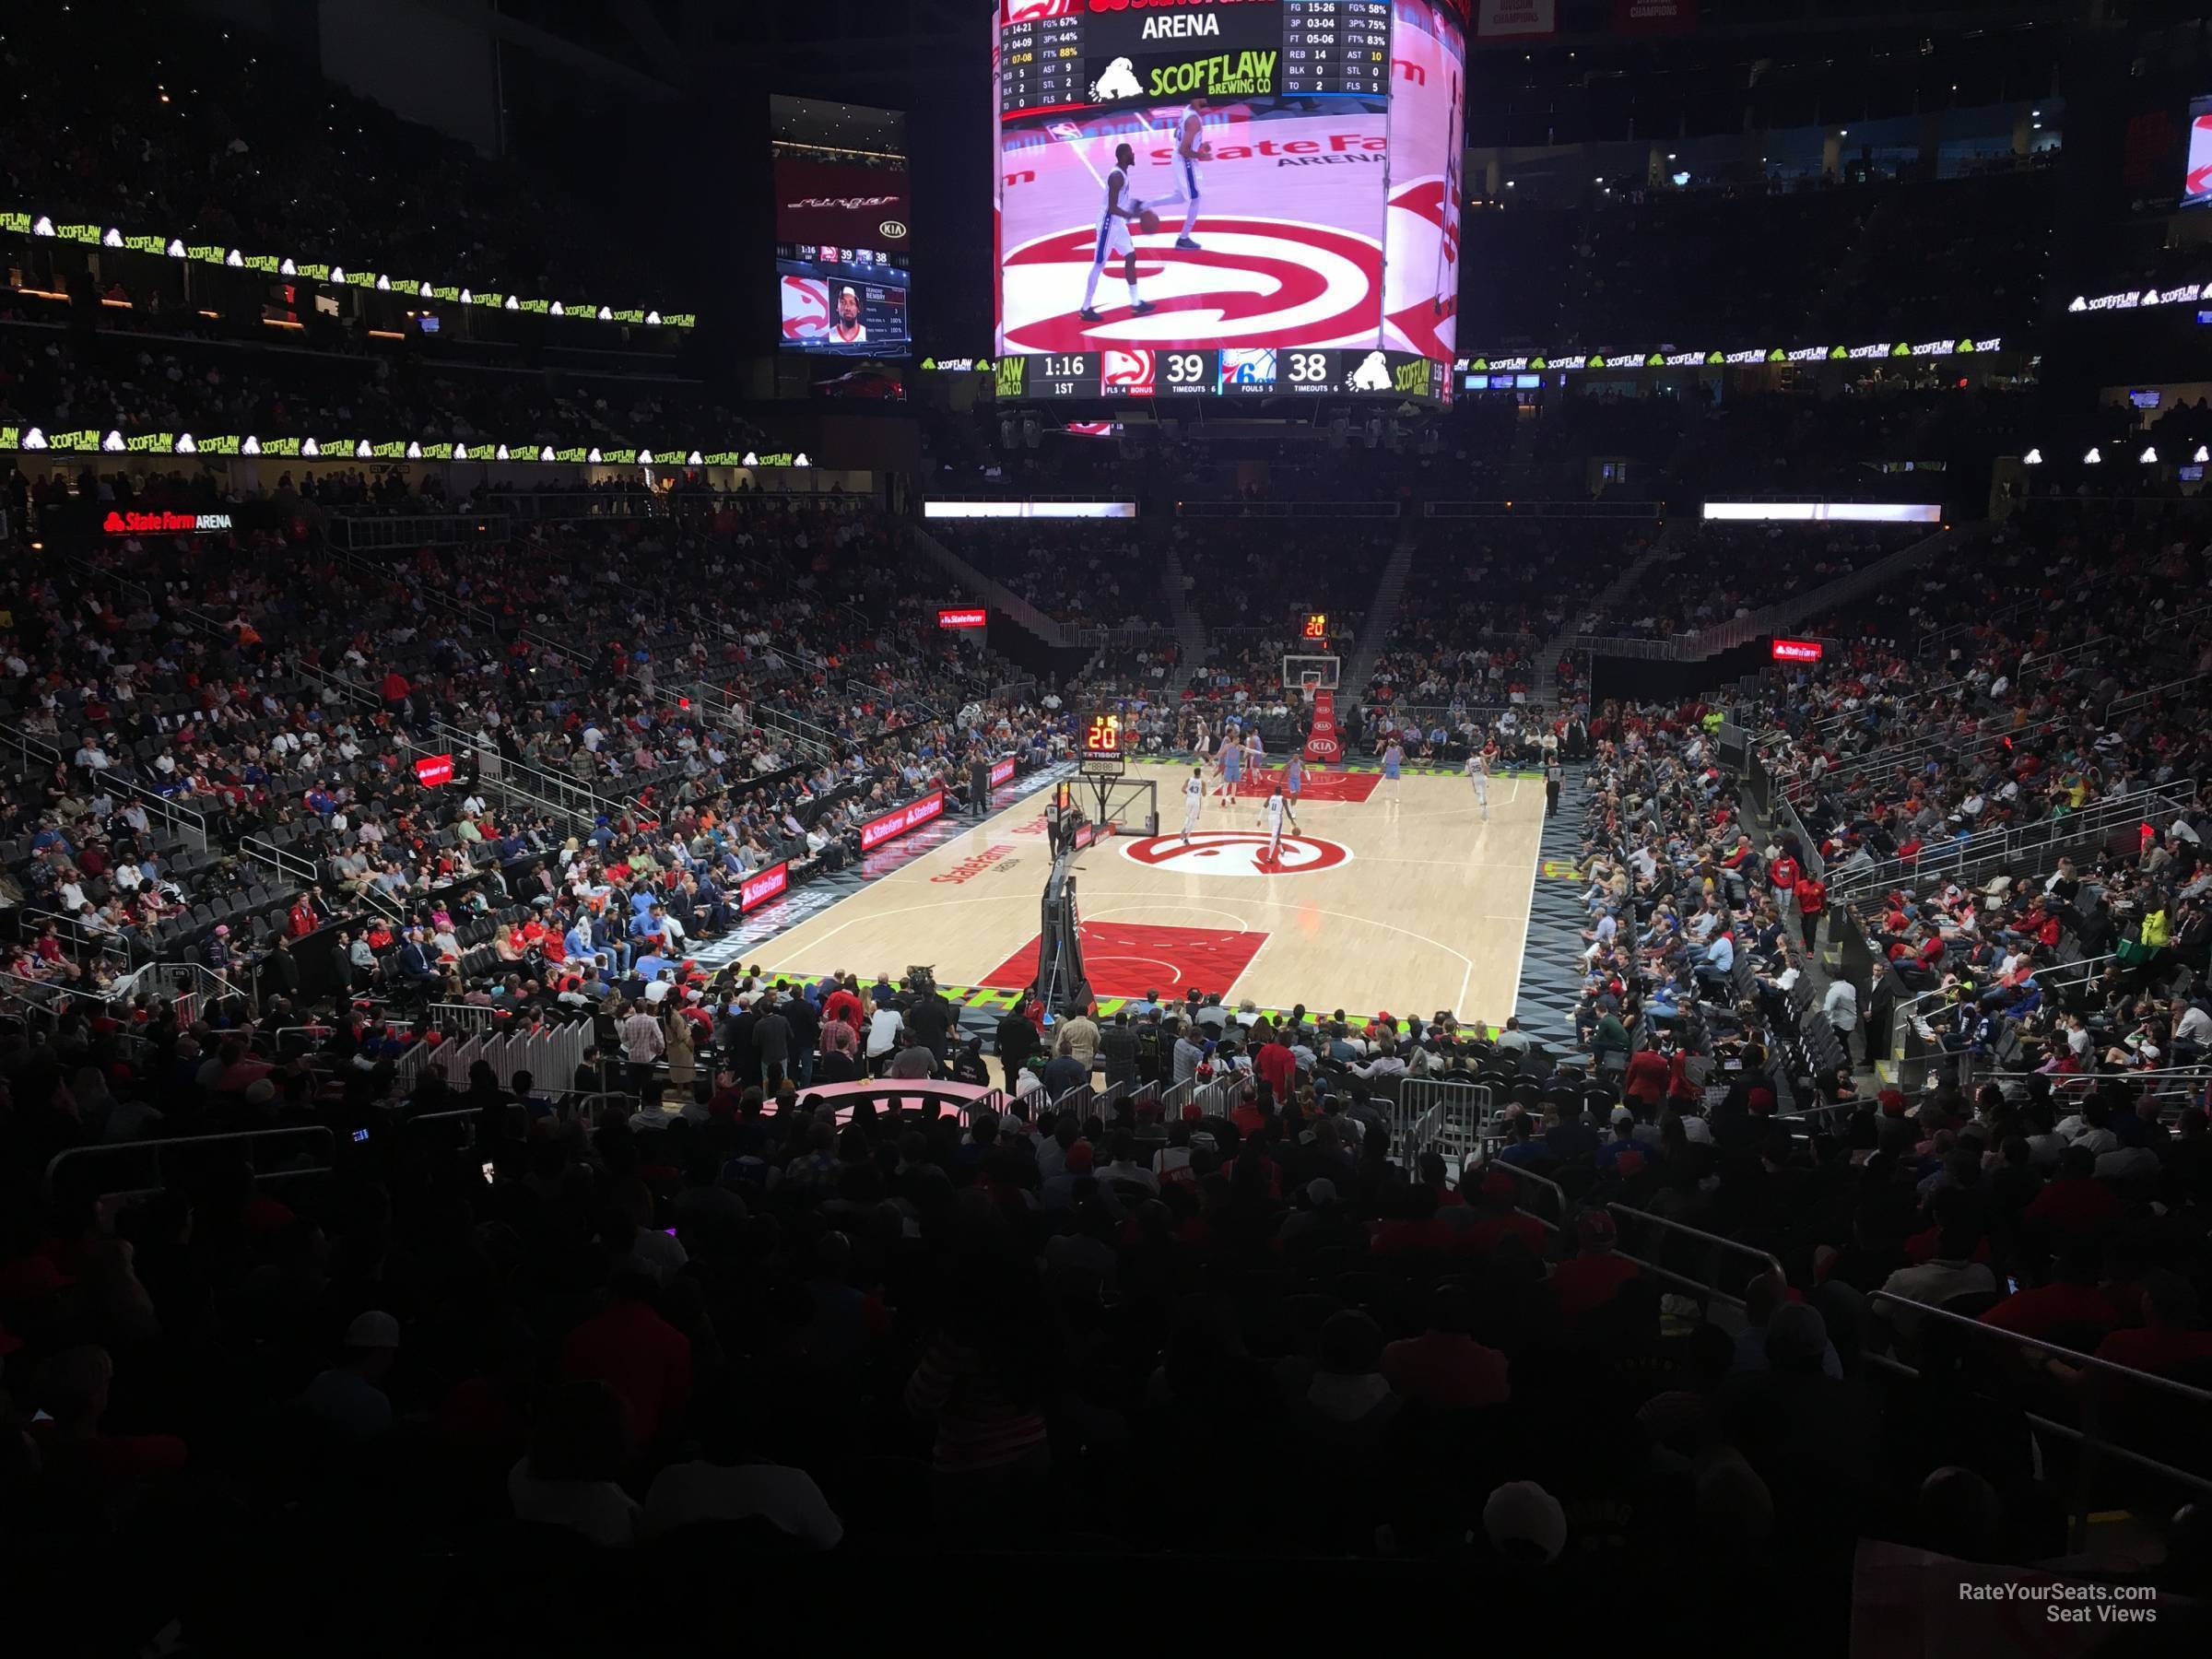 section 113, row u seat view  for basketball - state farm arena